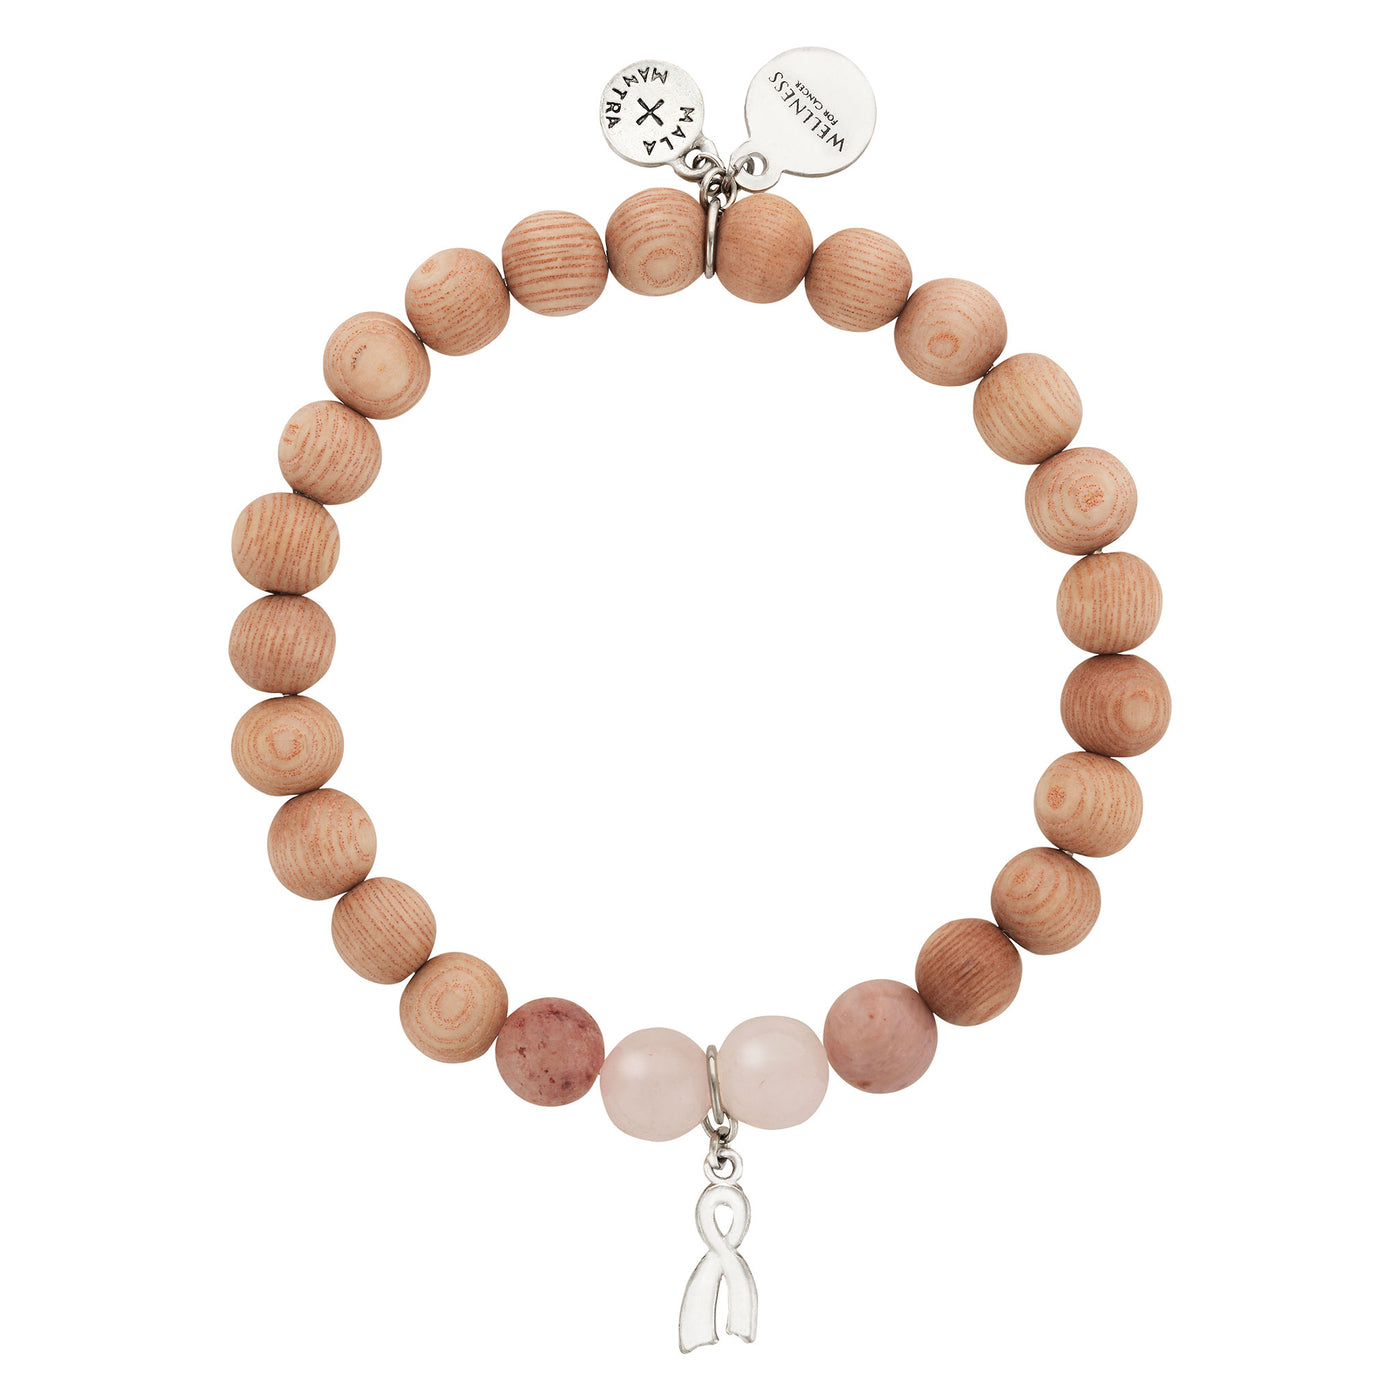 Wellness for Cancer Rosewood and Gemstone Stretch Bracelet with BCA charm